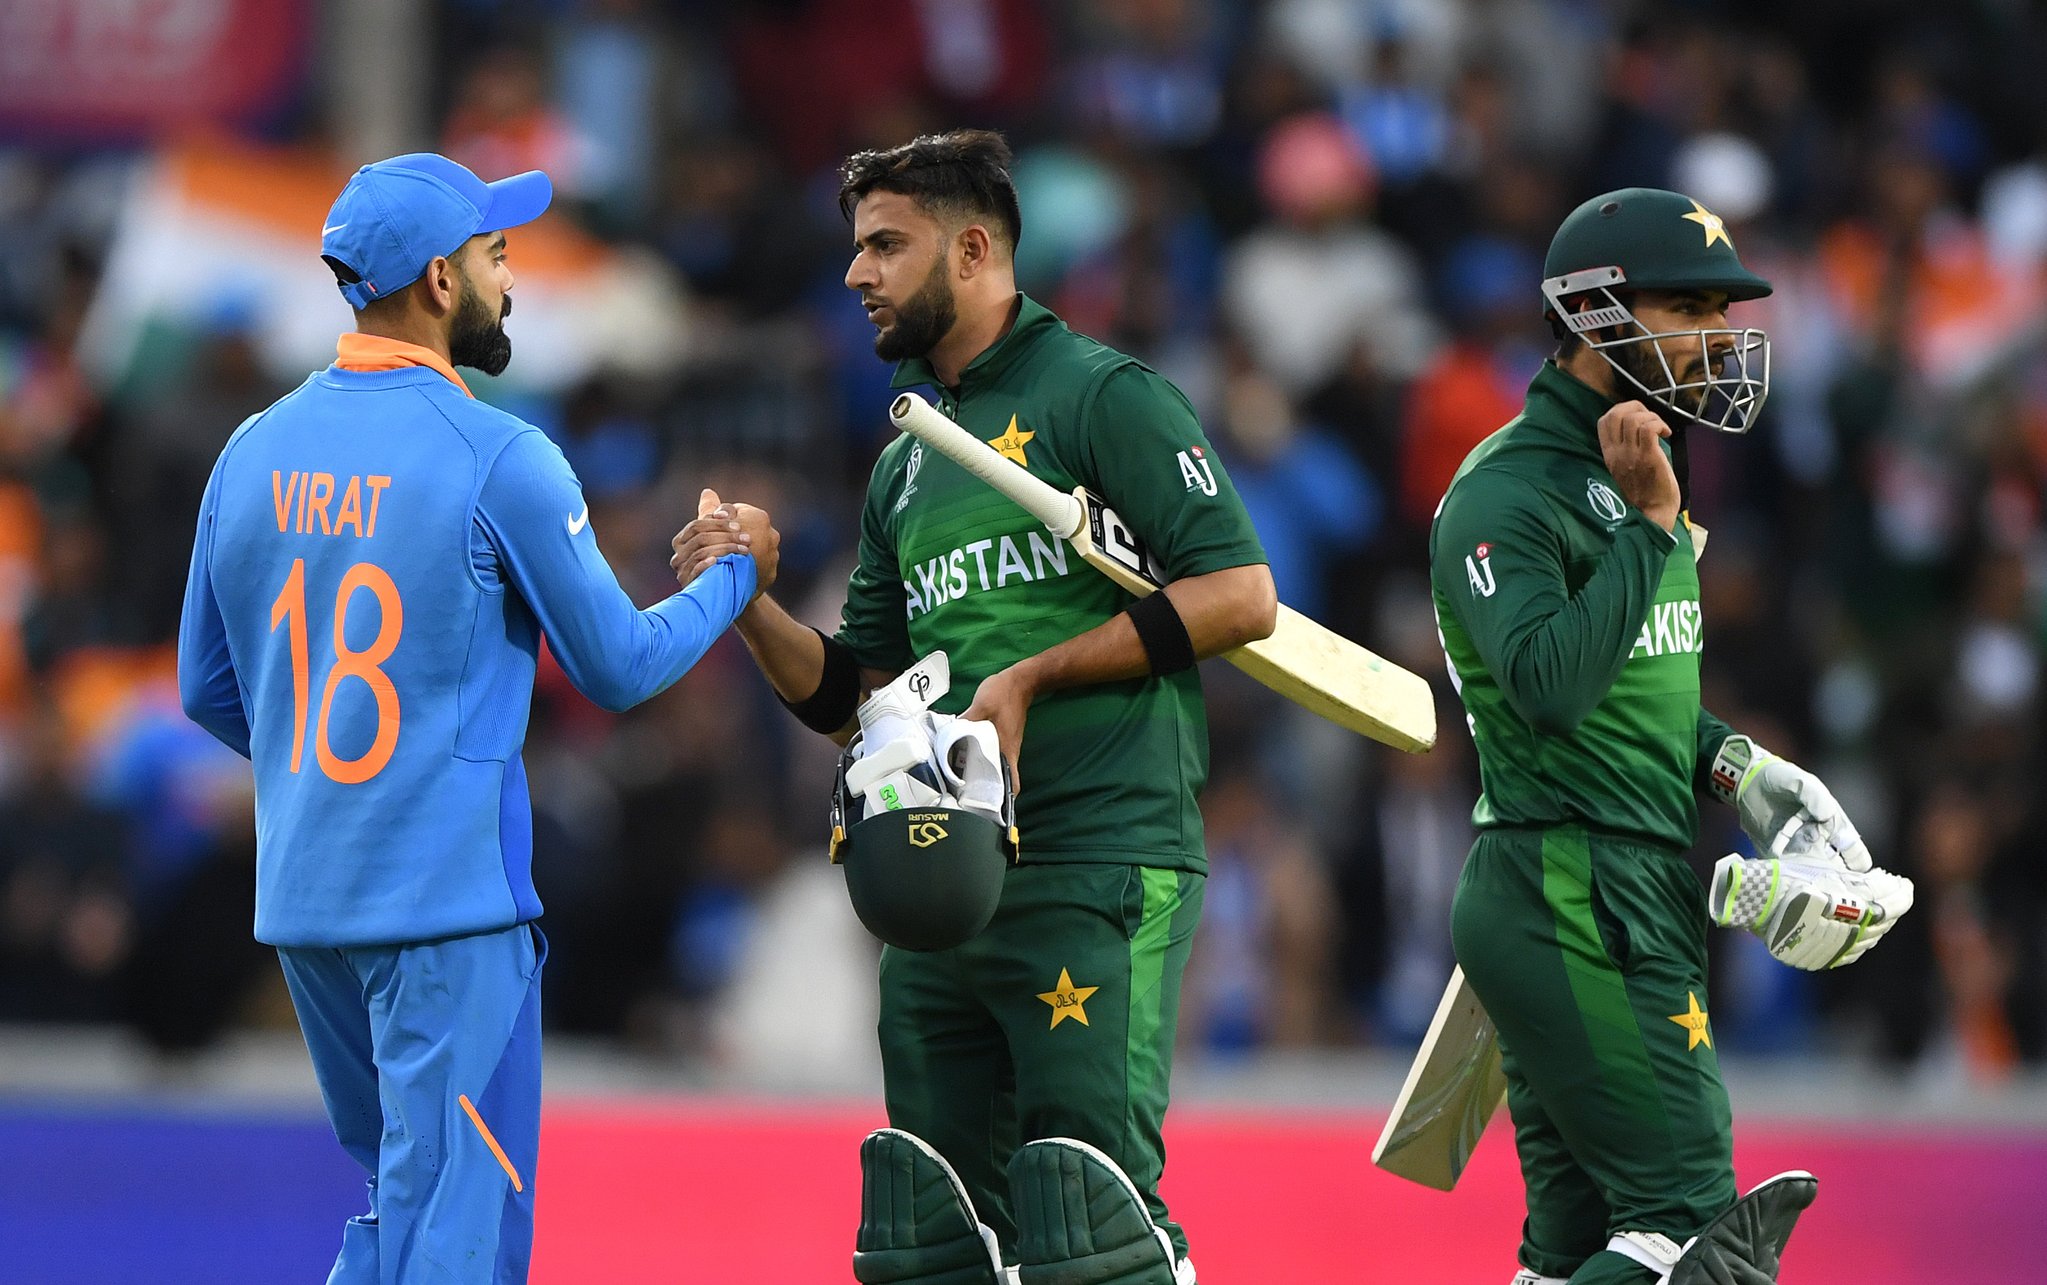 World Cup 2019: Pakistan has fallen behind the ranks in ODIs 8